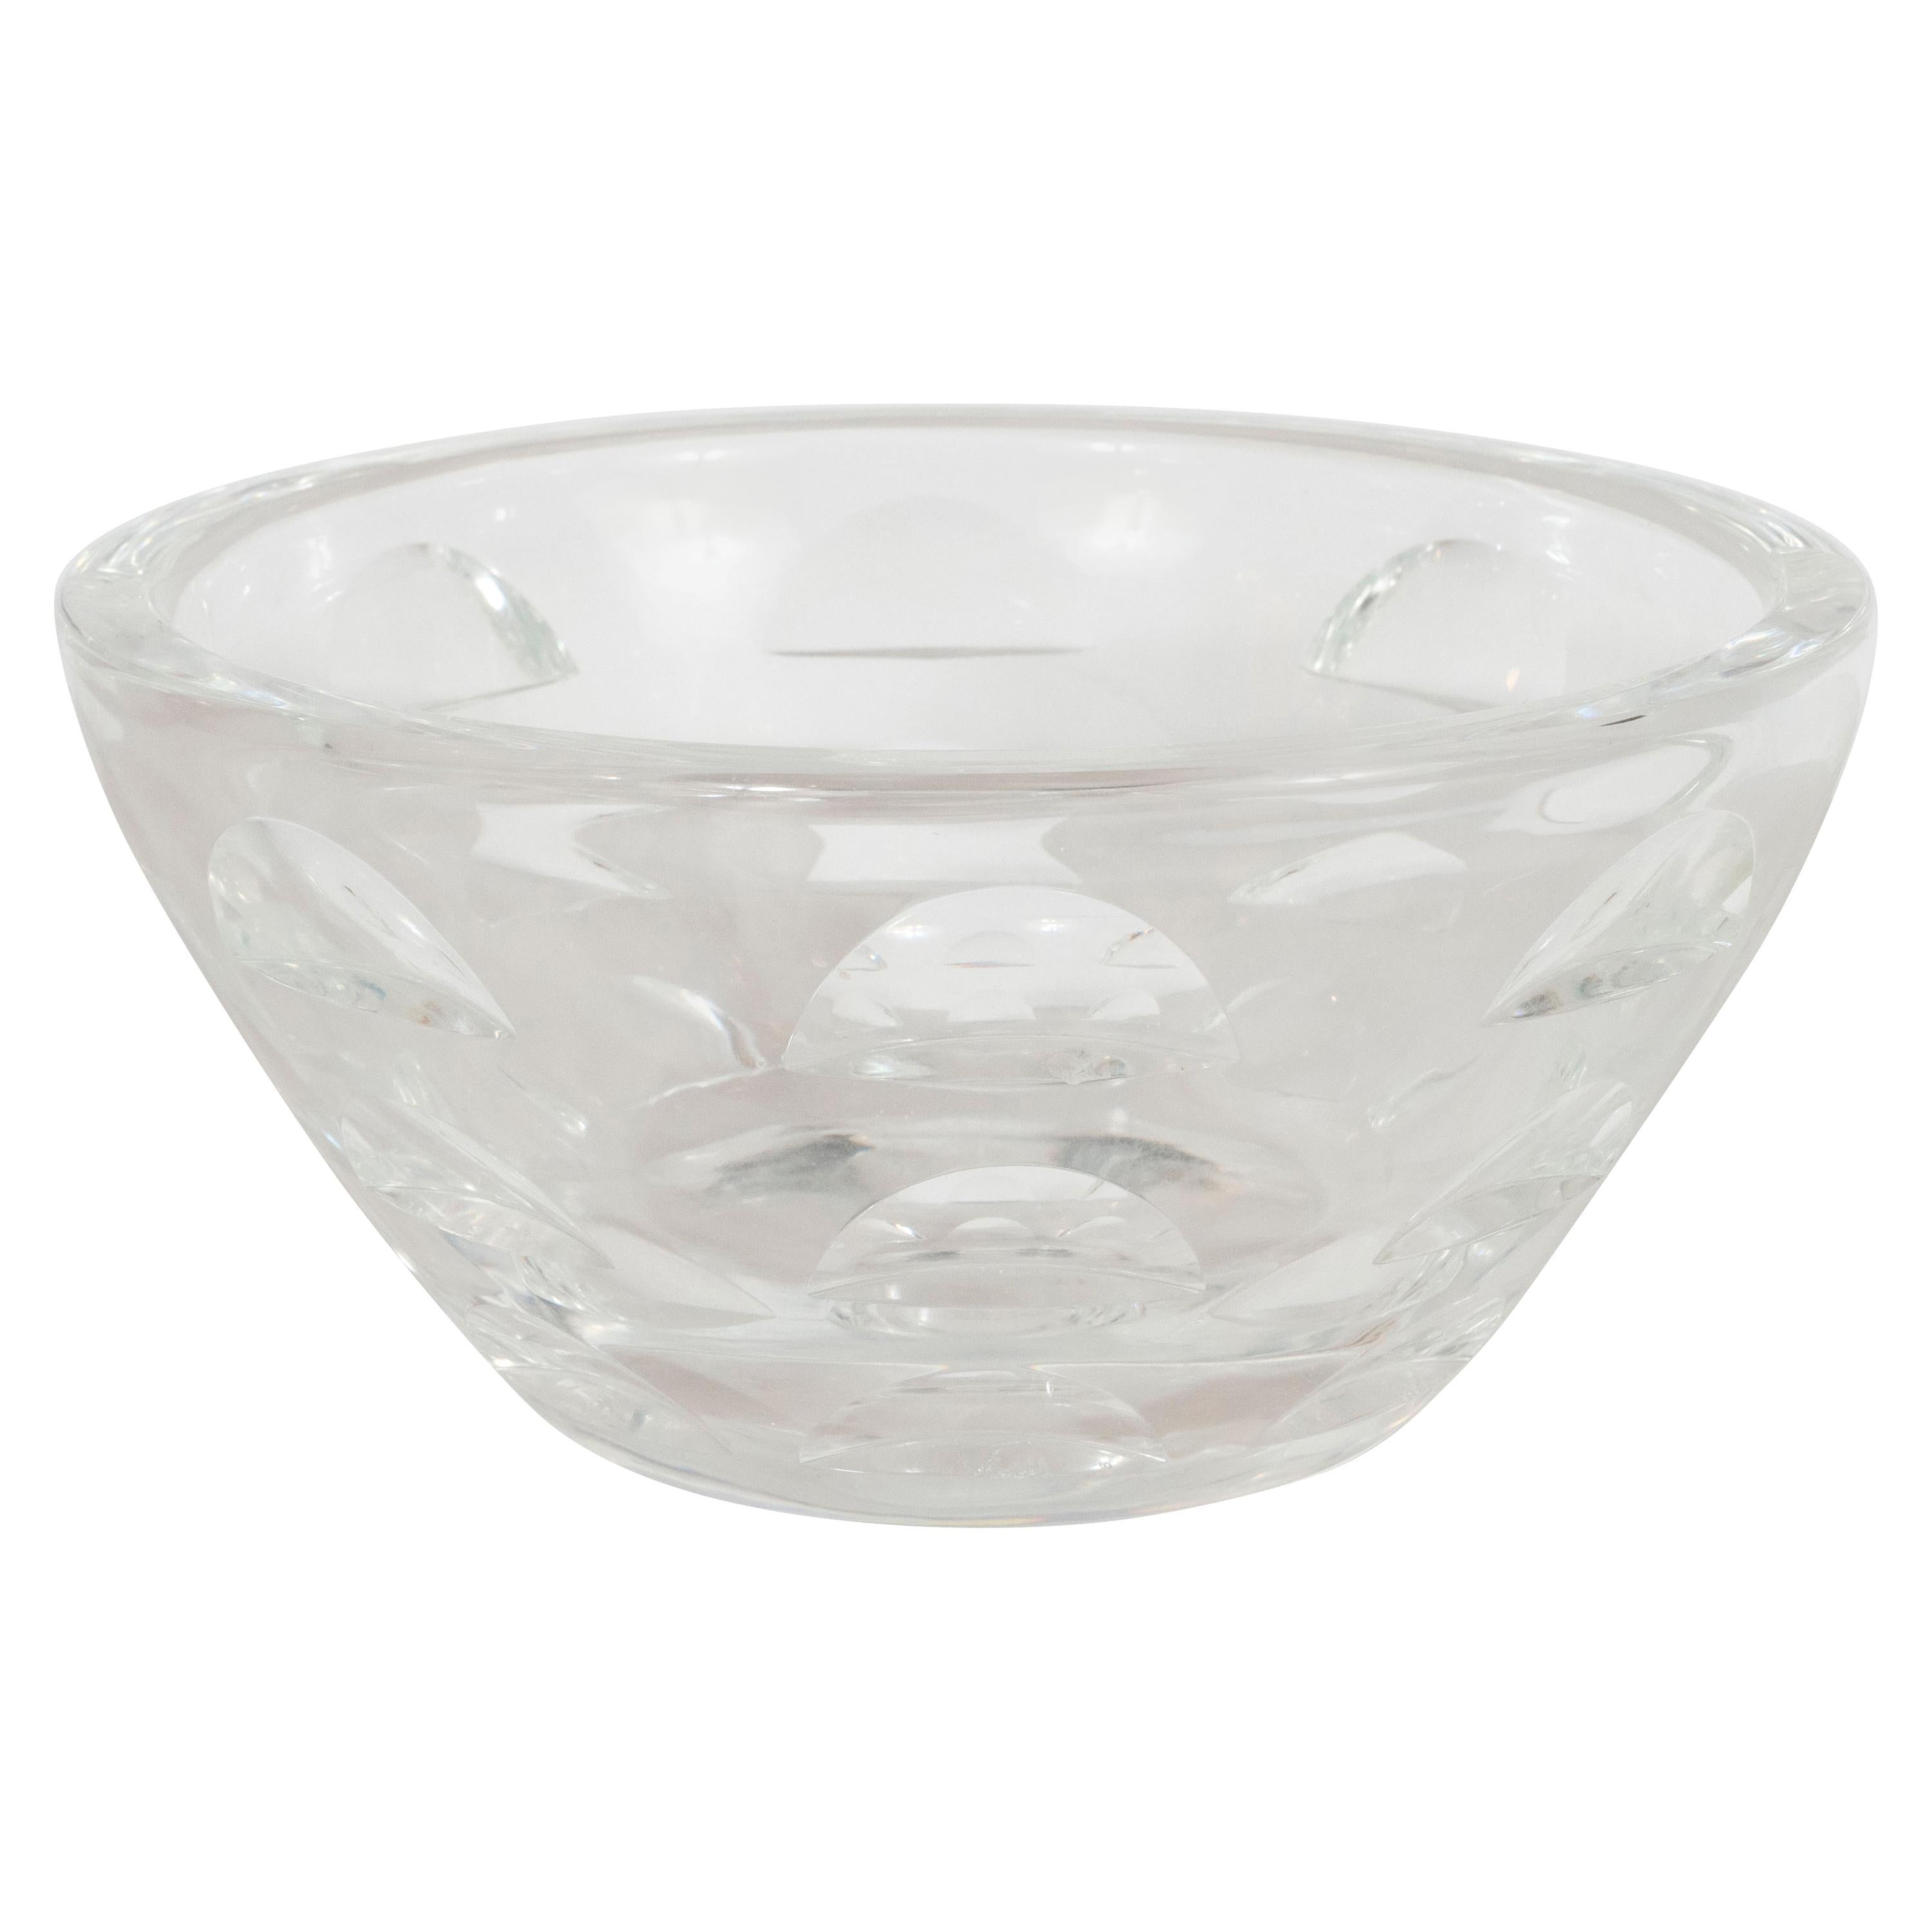 Art Deco Machine Age Glass Bowl with Incised Streamlined Forms by Steuben